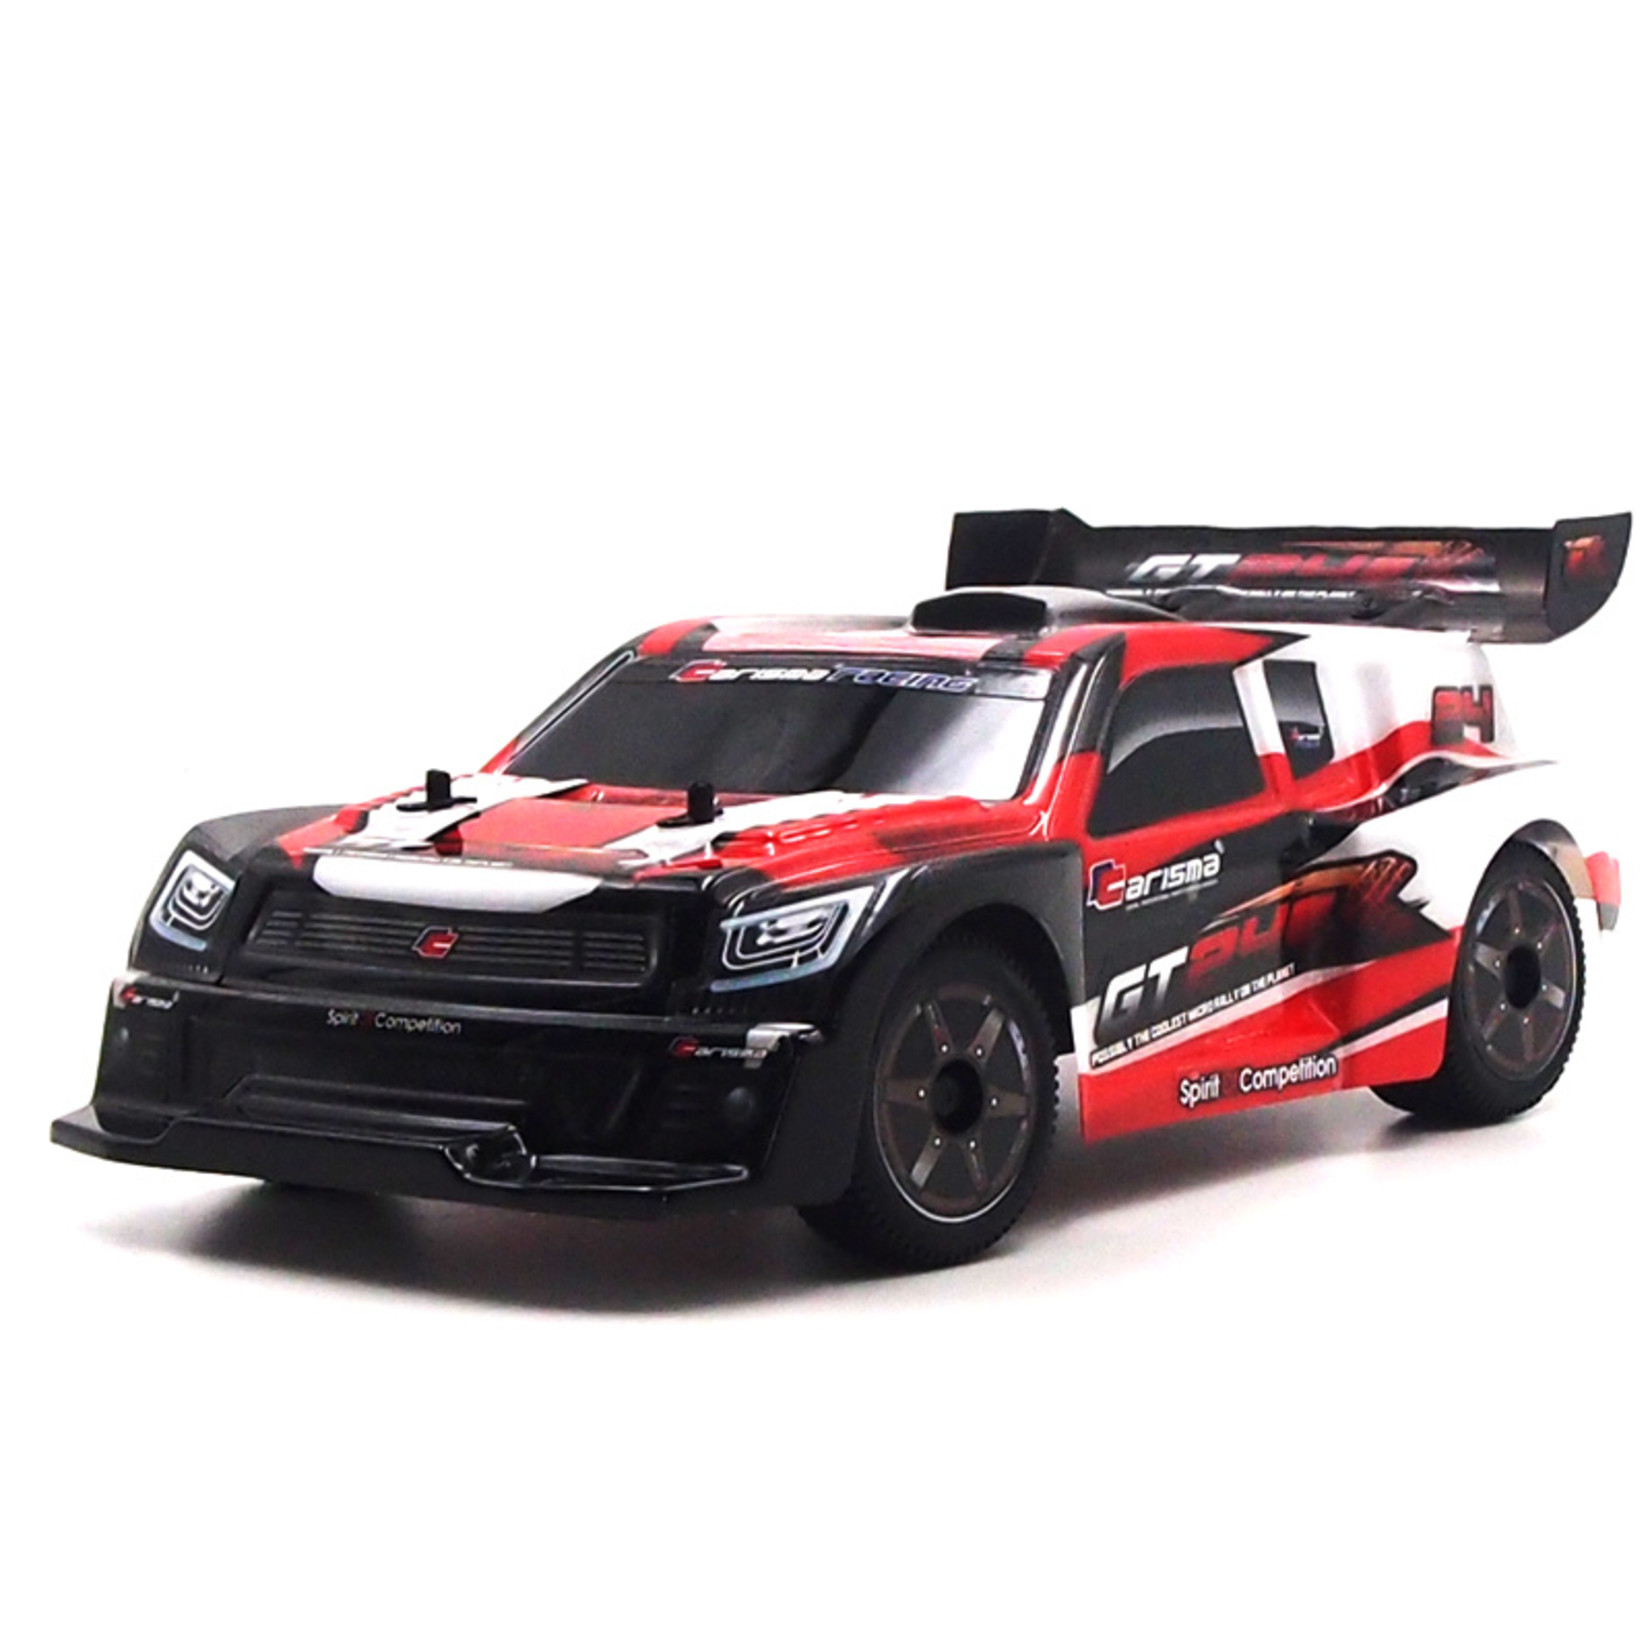 CARISMA GT24R 1/24 Scale Micro 4WD Rally, RTR